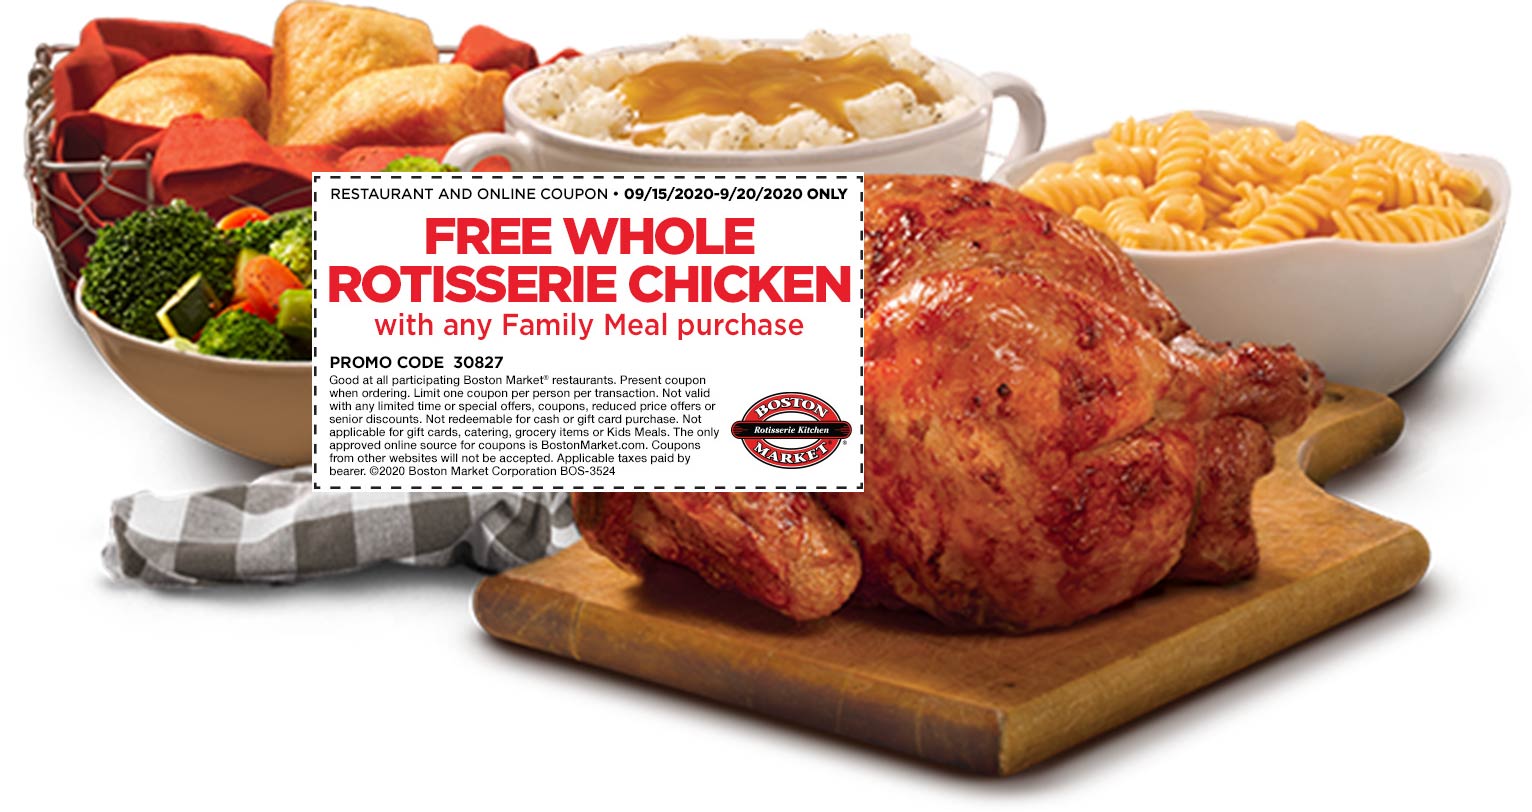 Boston Market restaurants Coupon  Free whole rotisserie chicken with your family meal at Boston Market #bostonmarket 